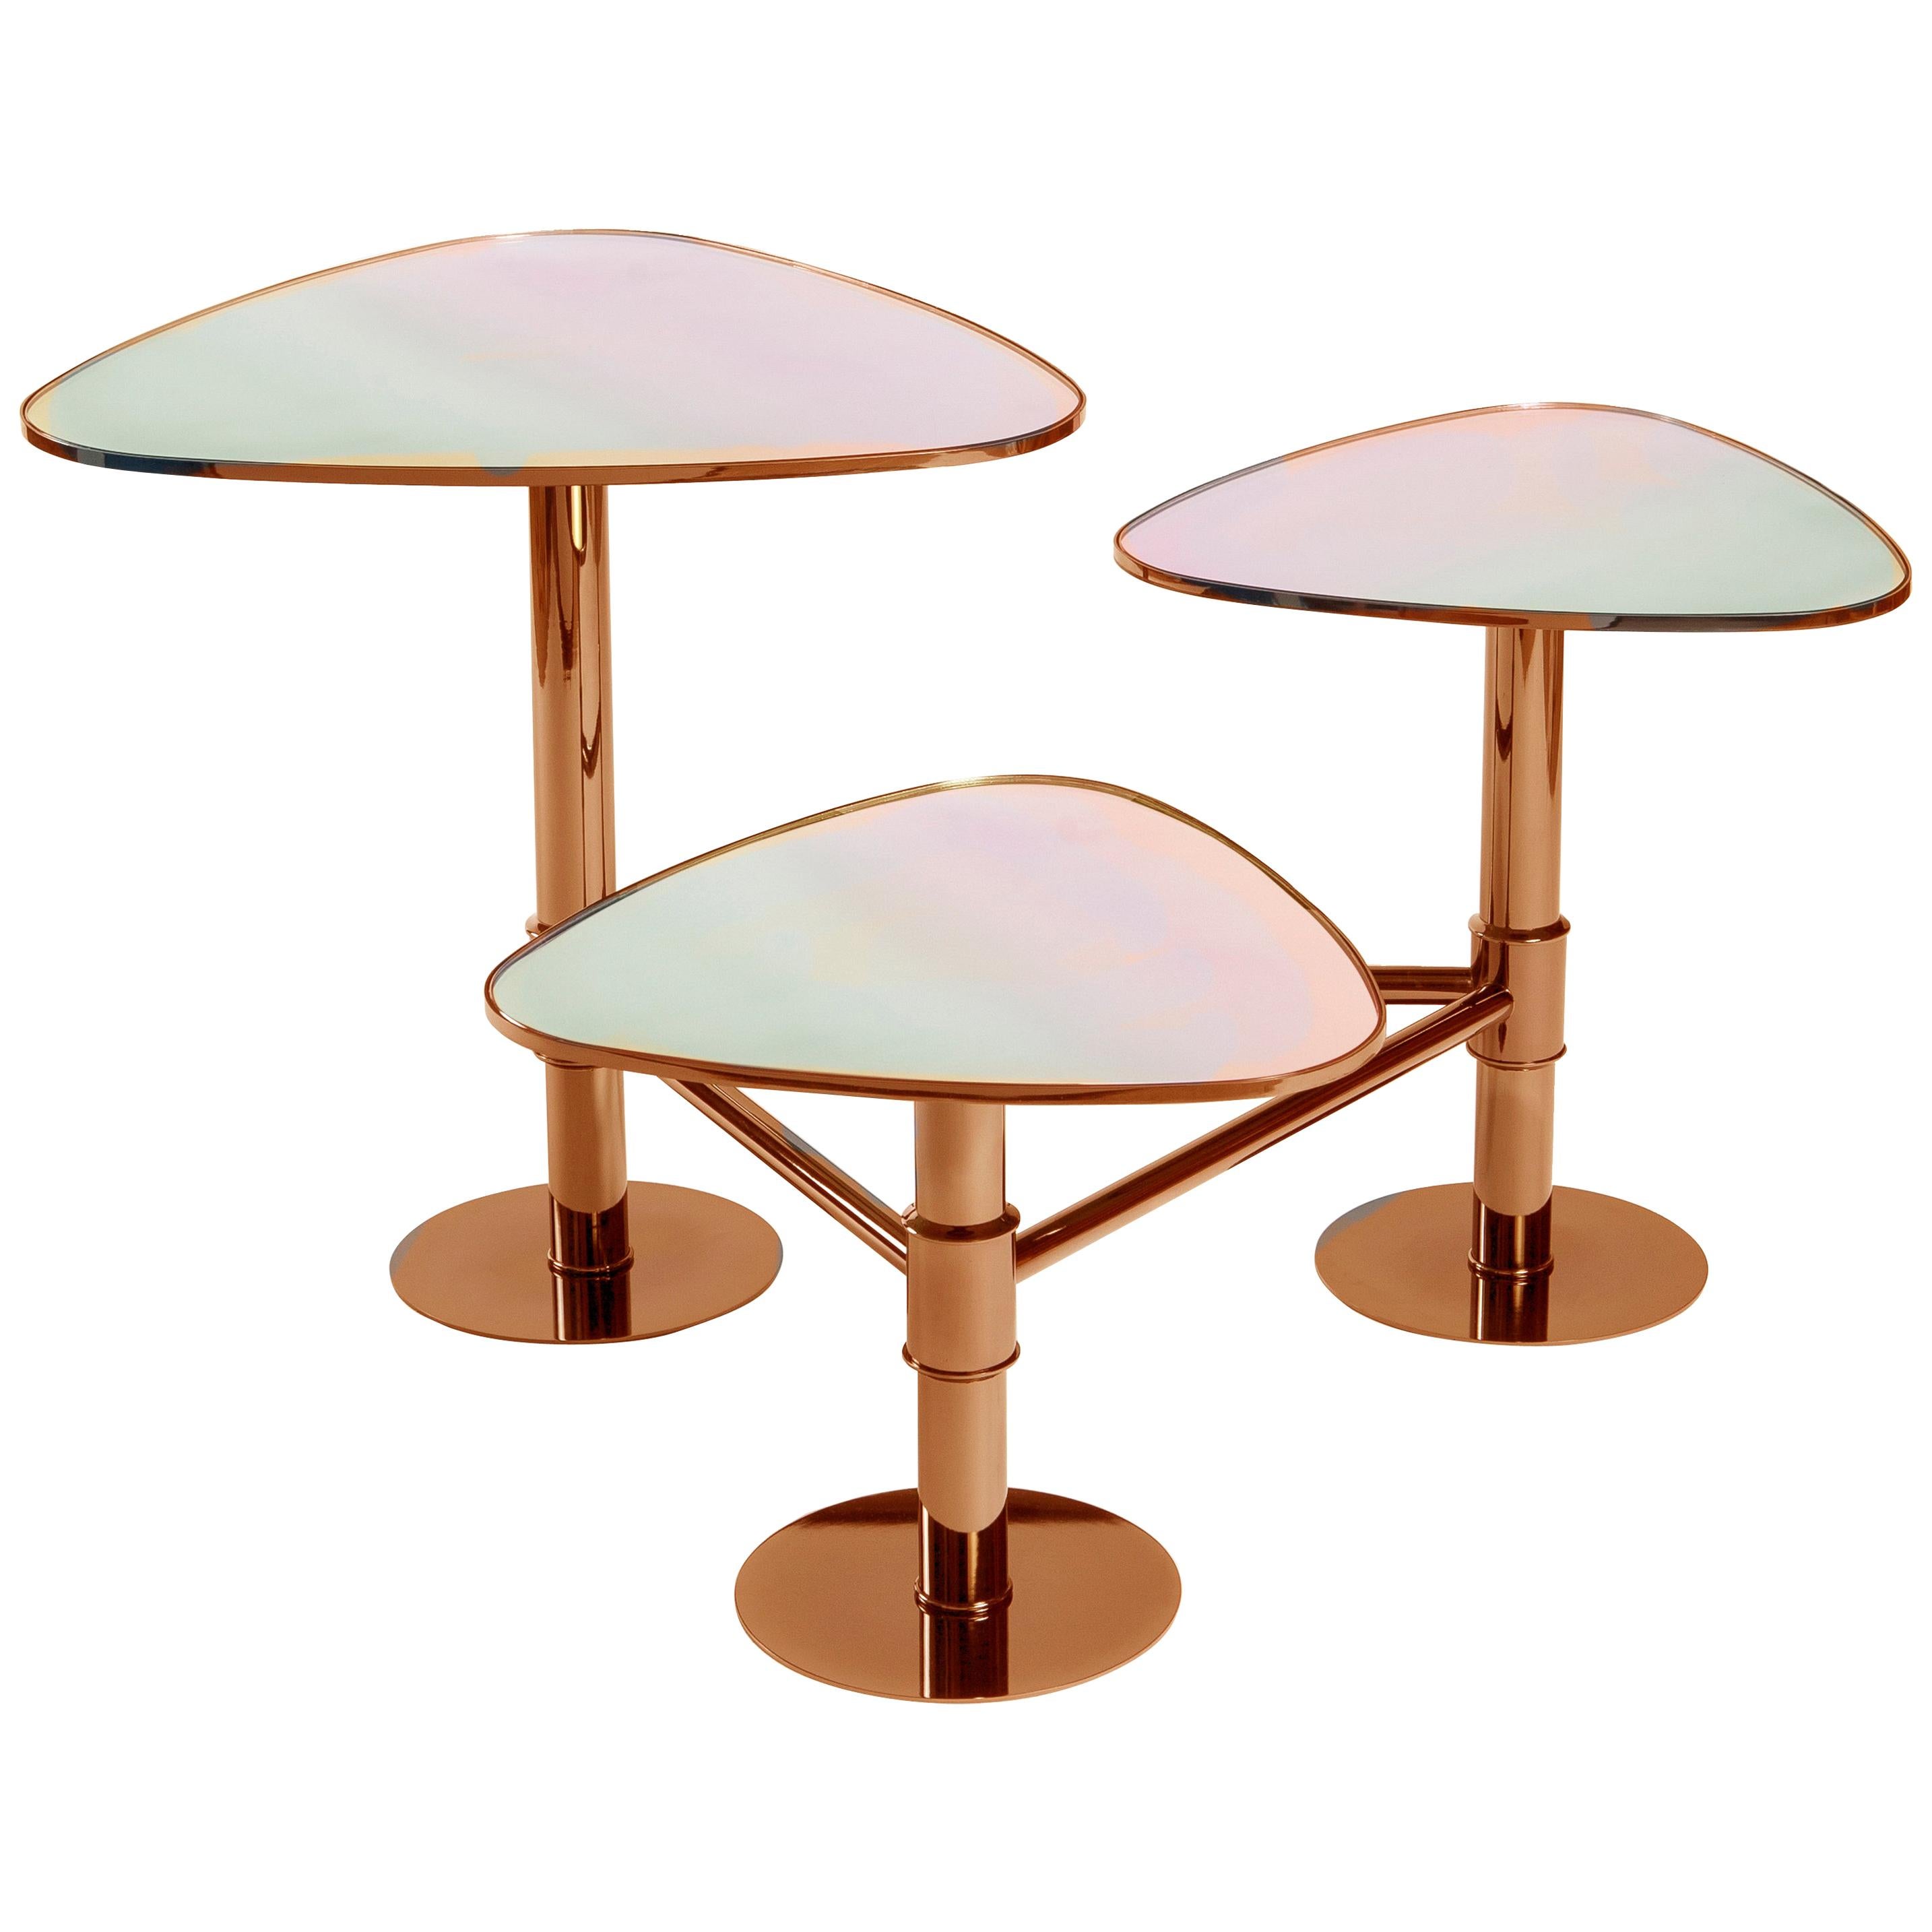 Flank Table, Modern Art Deco Center Table, Coffee Table, Mirror Table Top For Sale